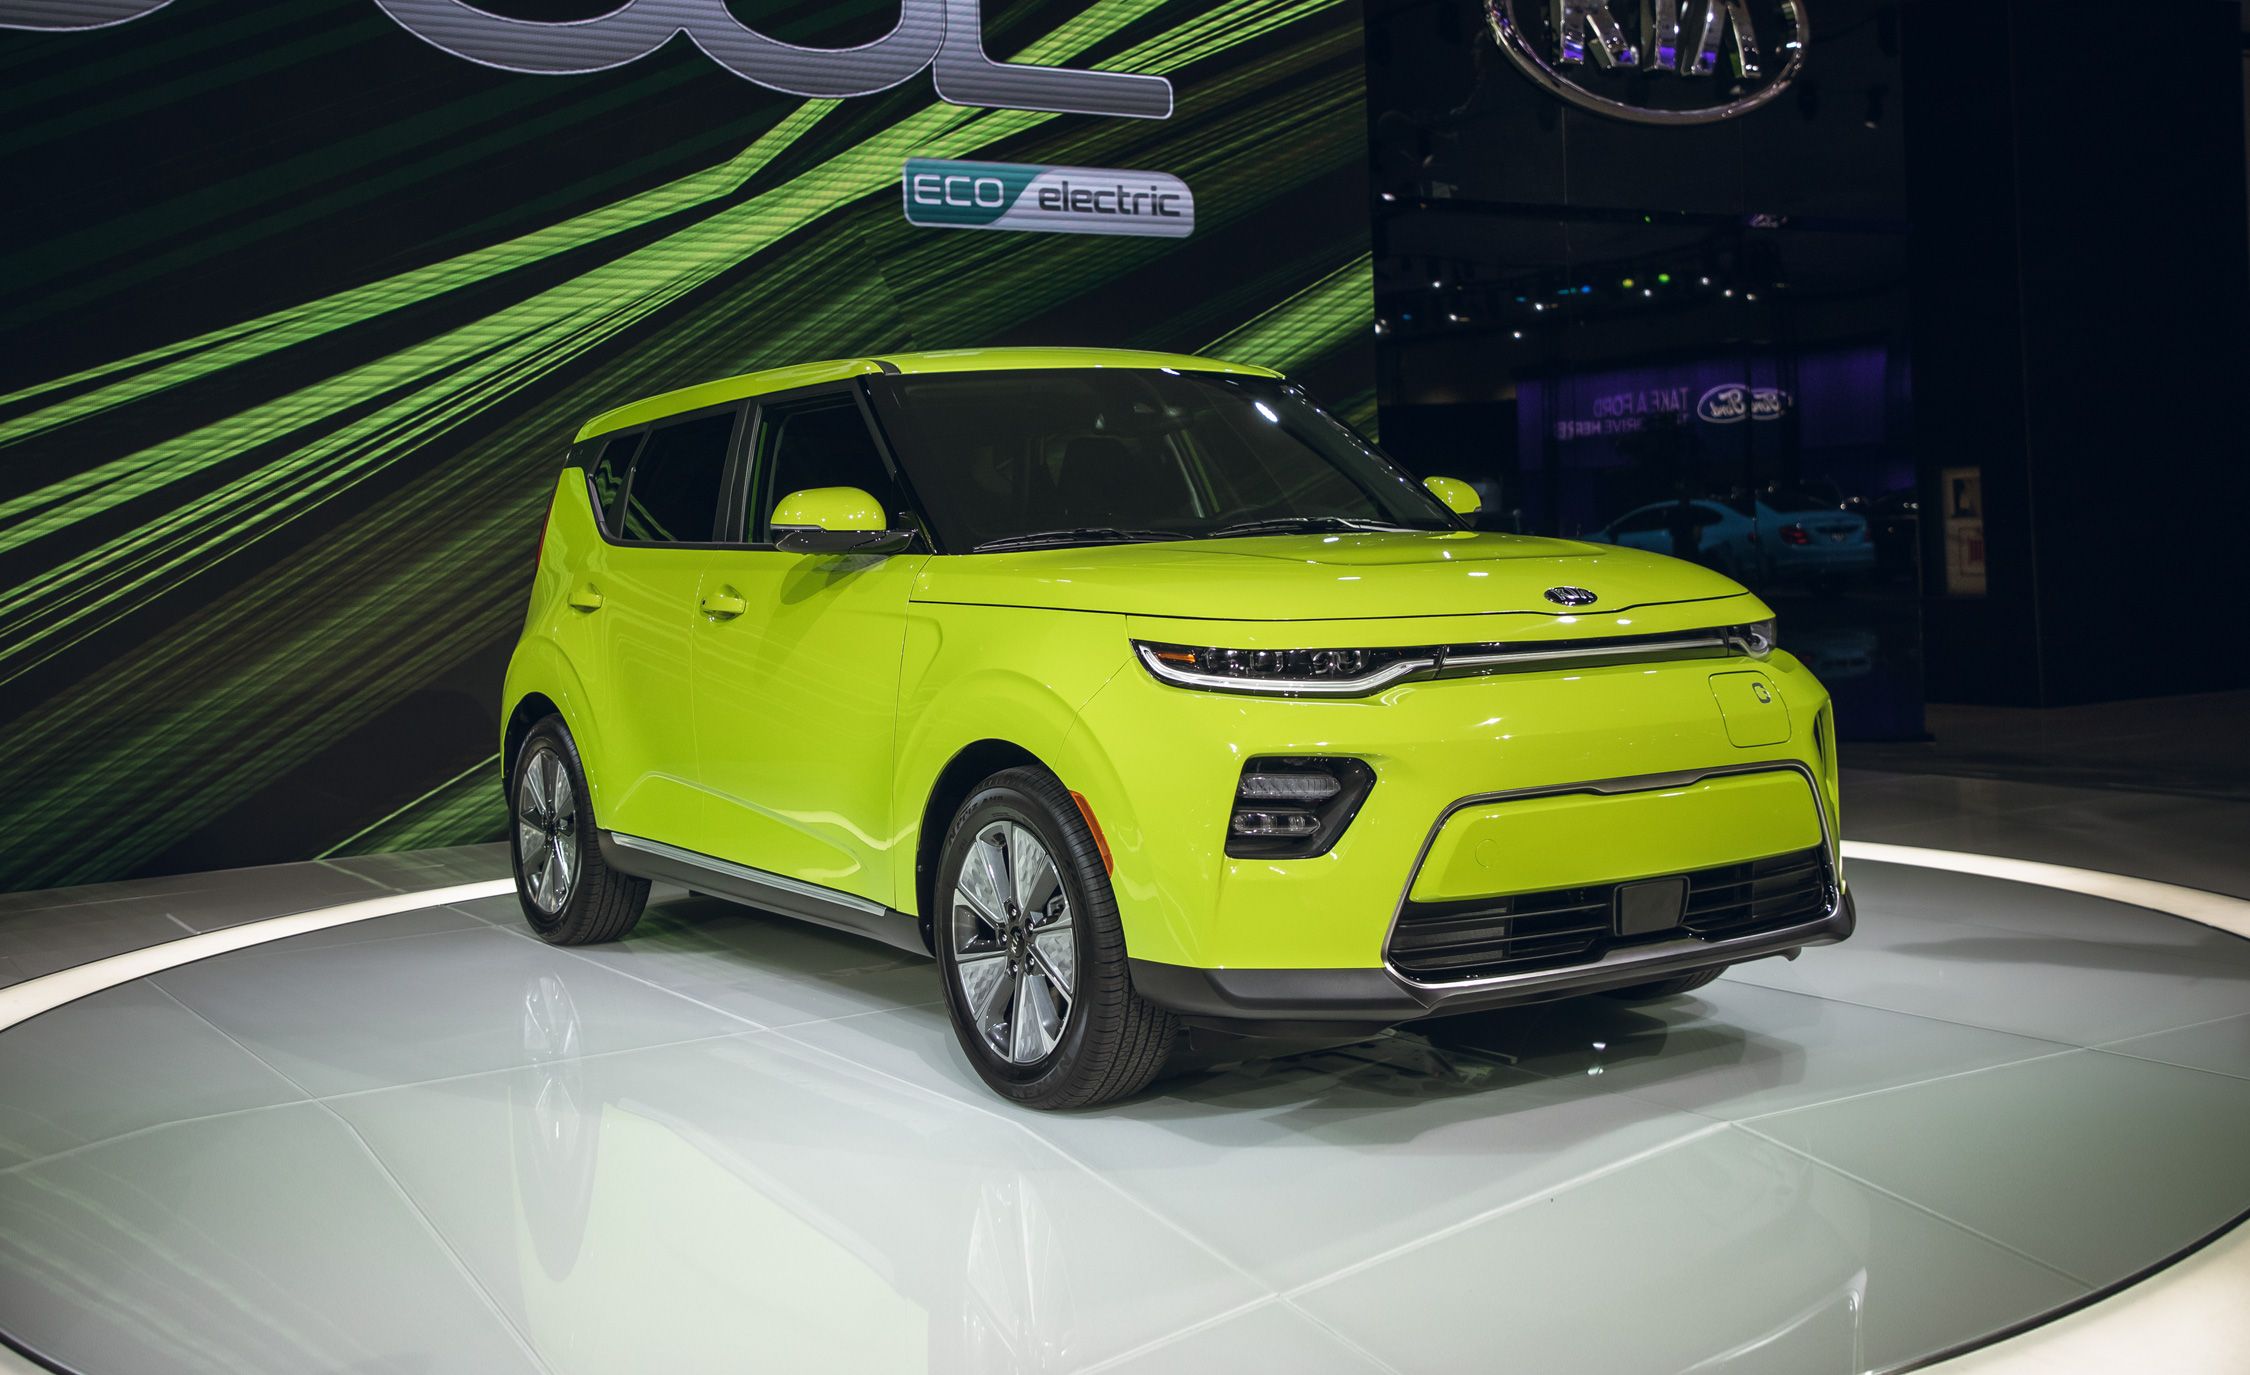 2020 Kia Soul EV - New Electric Crossover Gets More Power